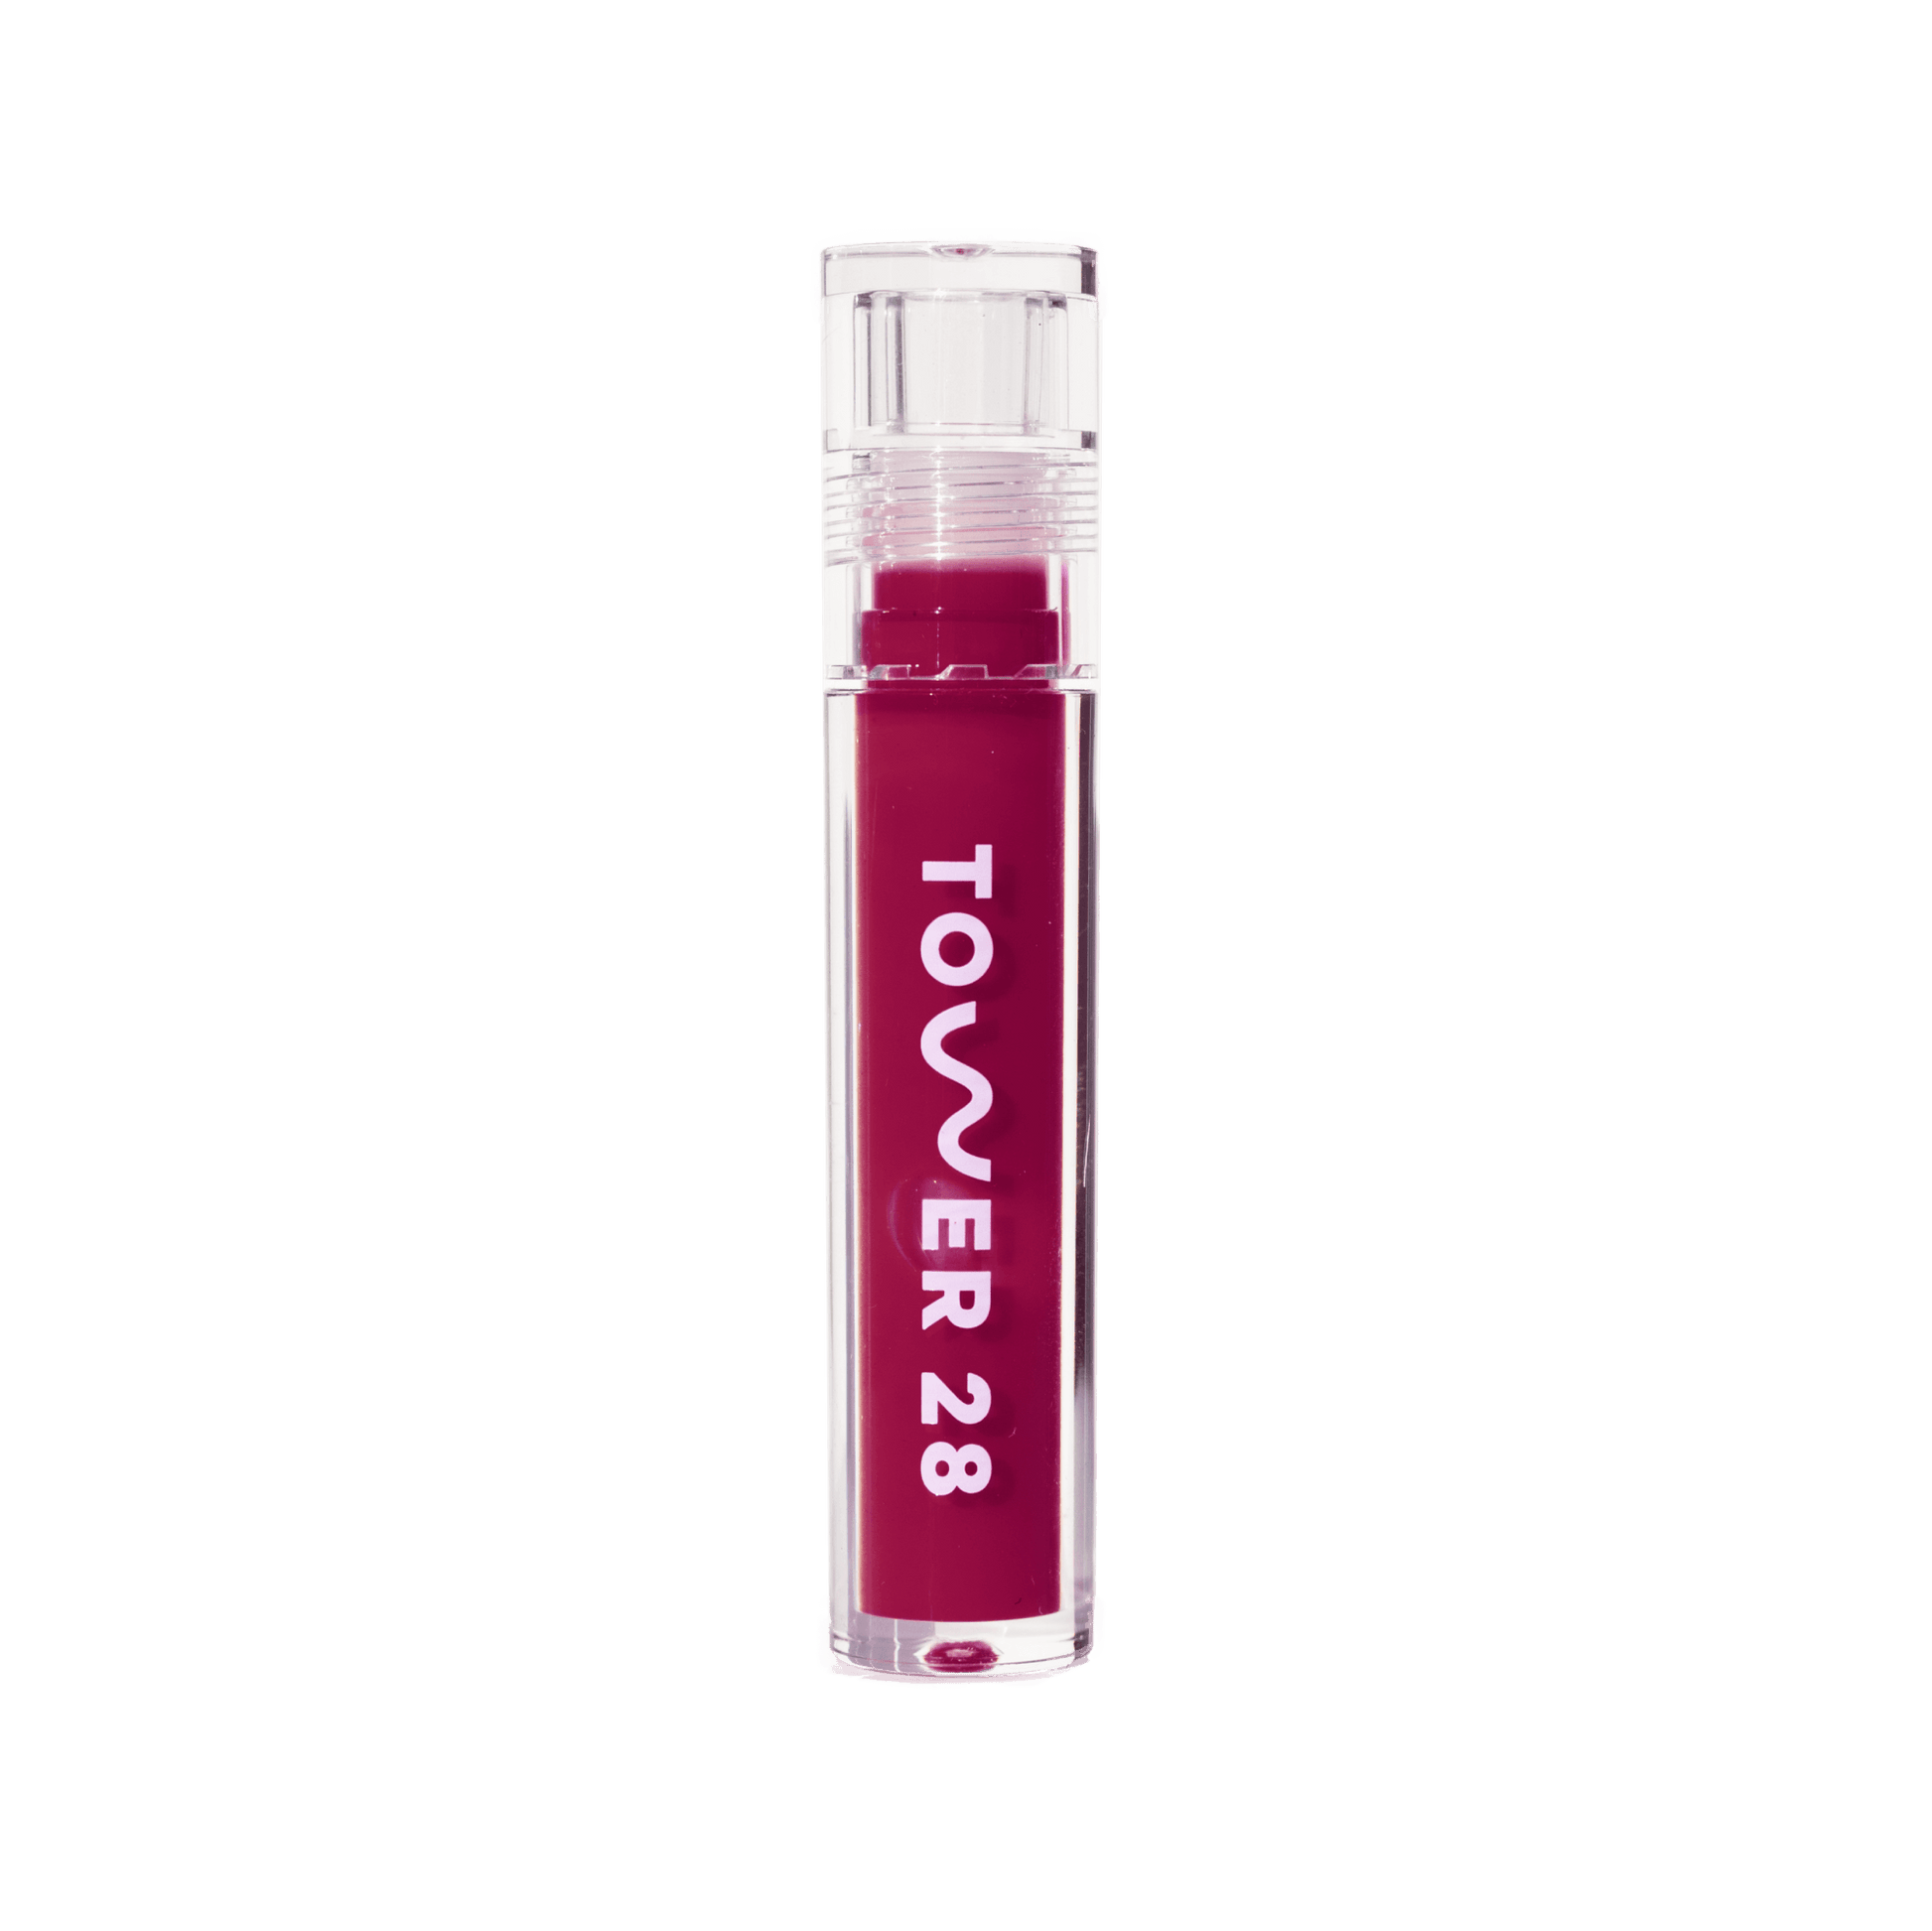 The Tower 28 Beauty ShineOn Lip Jelly in the shade Wild